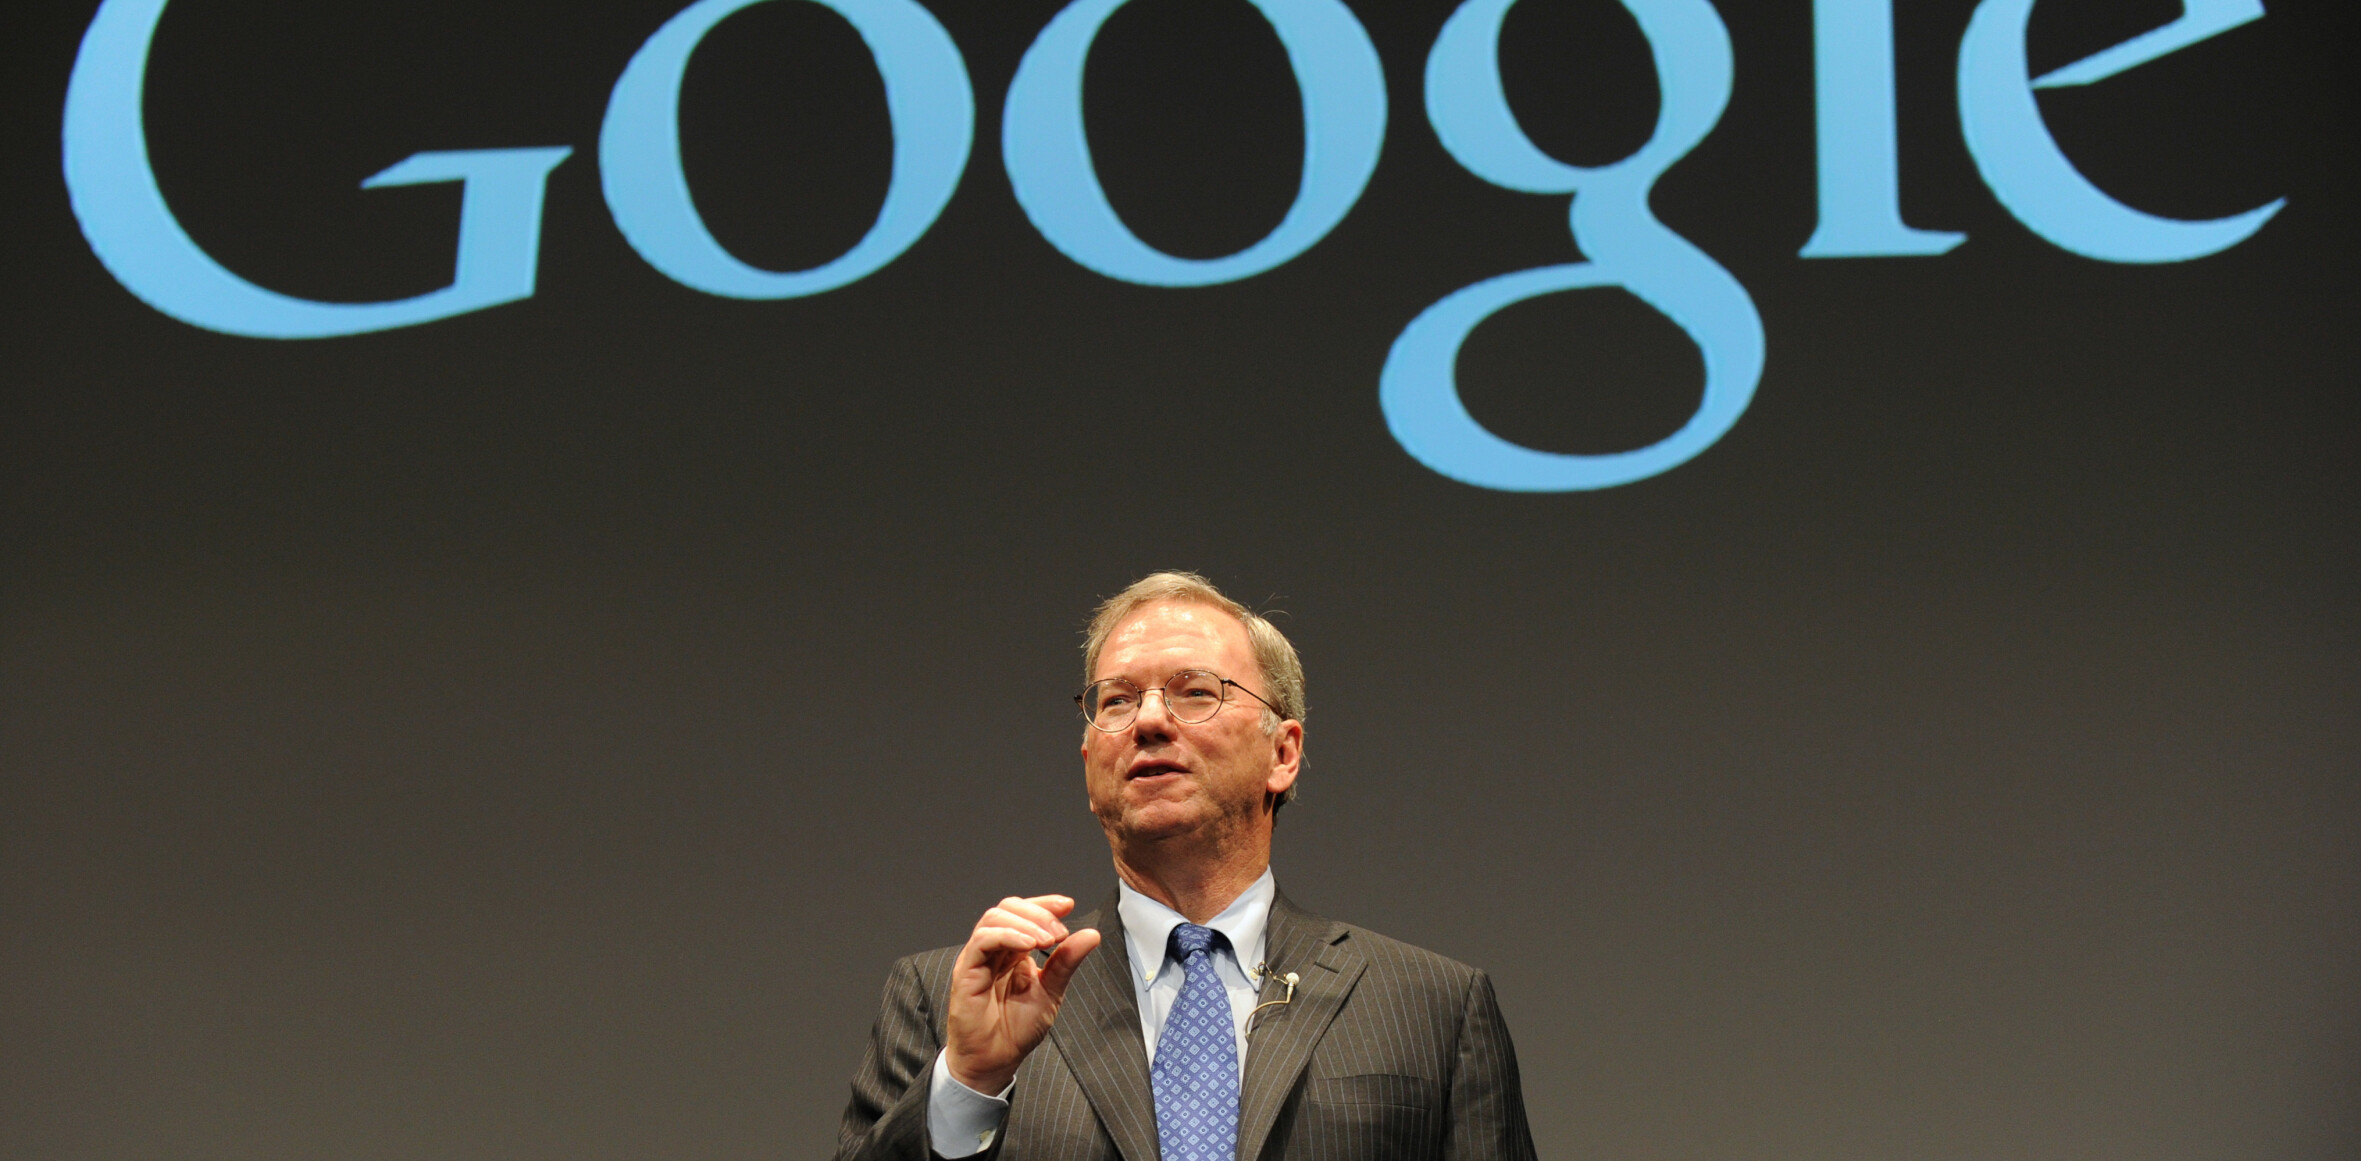 Google’s Eric Schmidt urges China to adopt an open Internet to tackle future growth problems